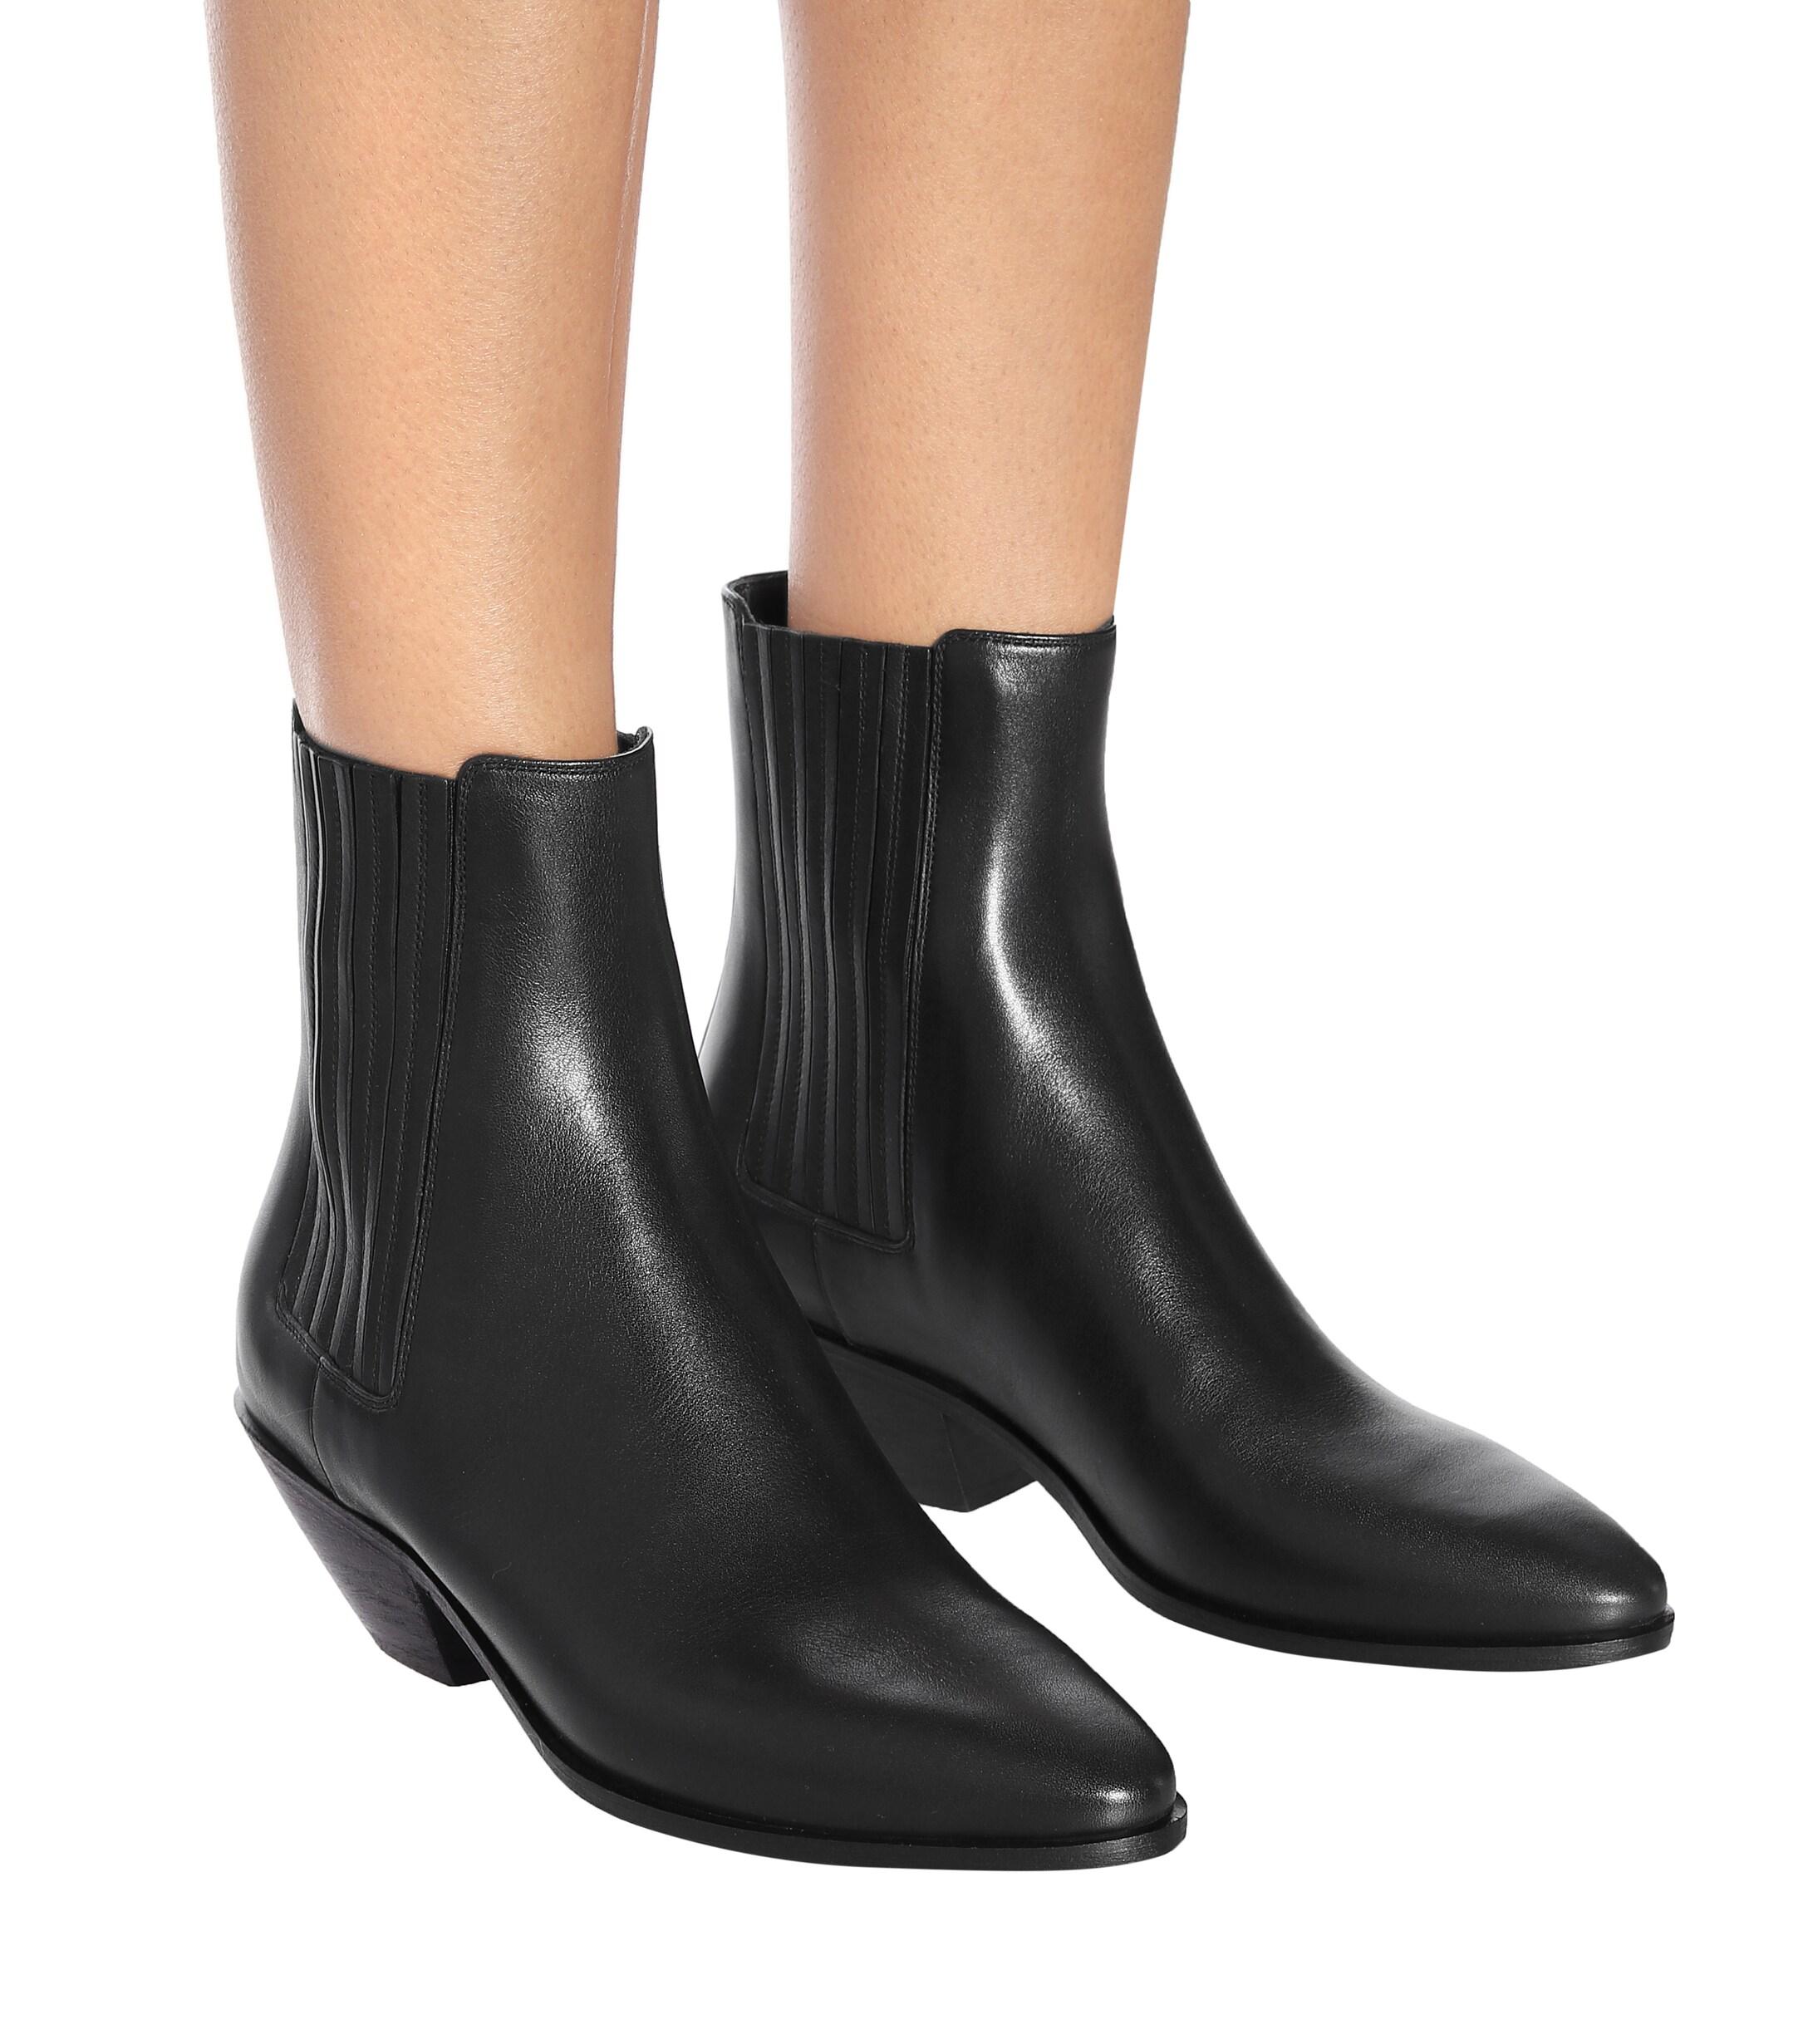 Ysl West Chelsea Boots Discount, SAVE 50% - aveclumiere.com